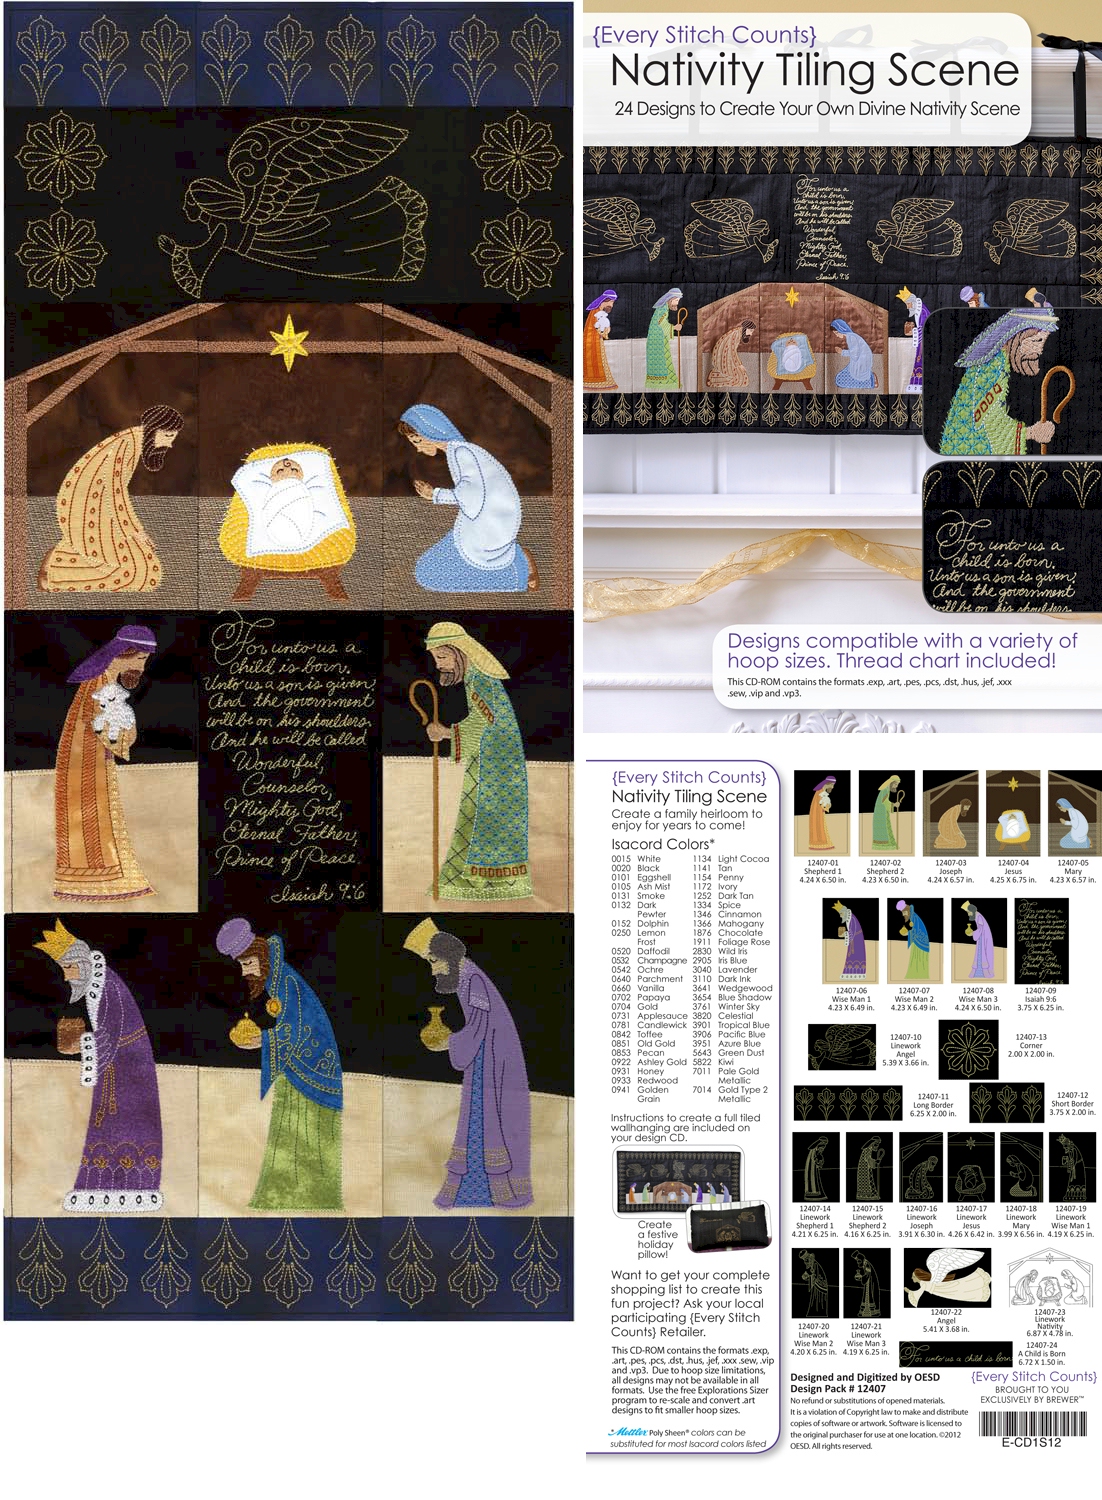 Nativity Tiling Scene Embroidery Designs on CD-ROM by Every Stitch Counts